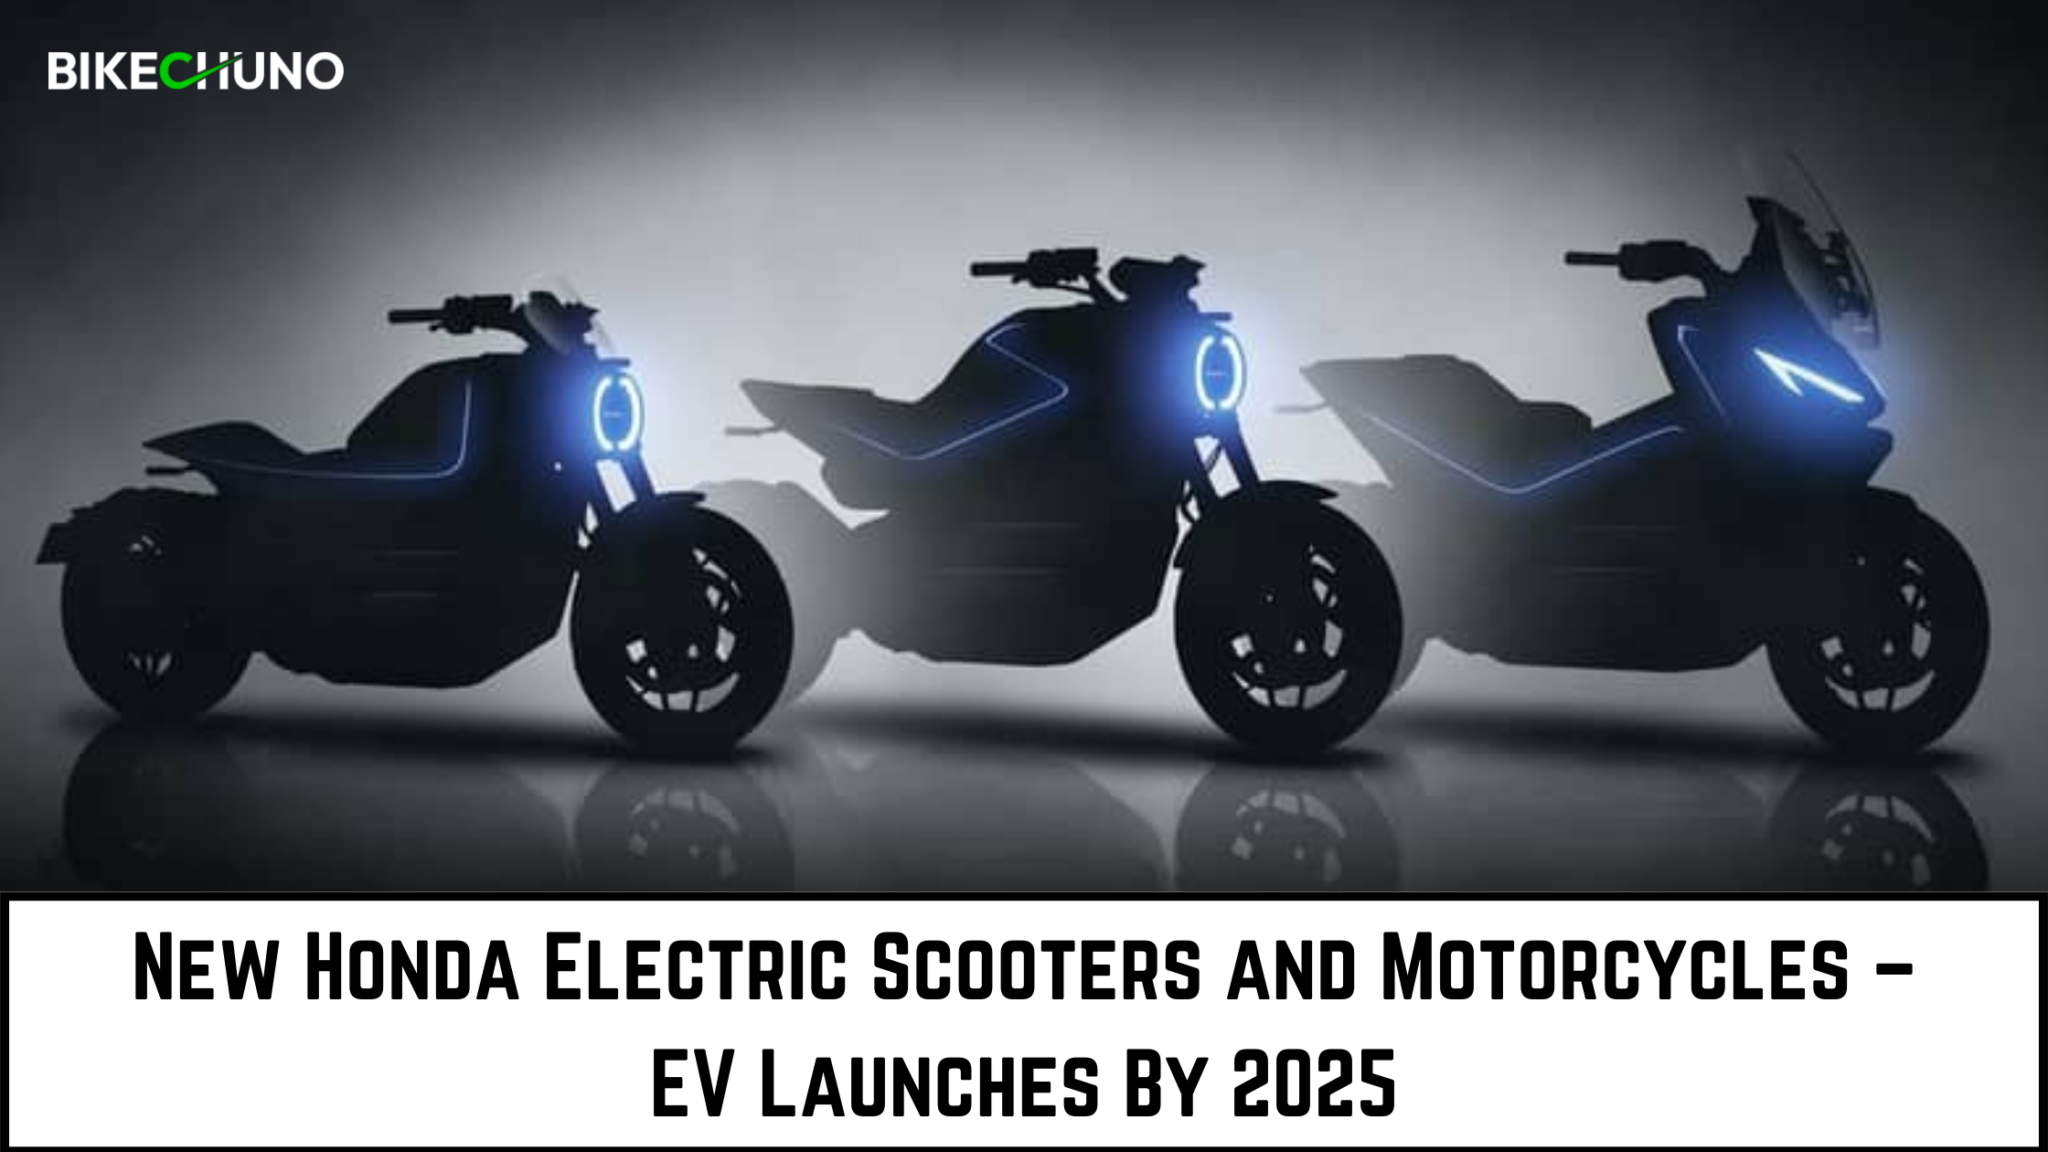 New Honda Electric Scooters and Motorcycles EV Launches By 2025